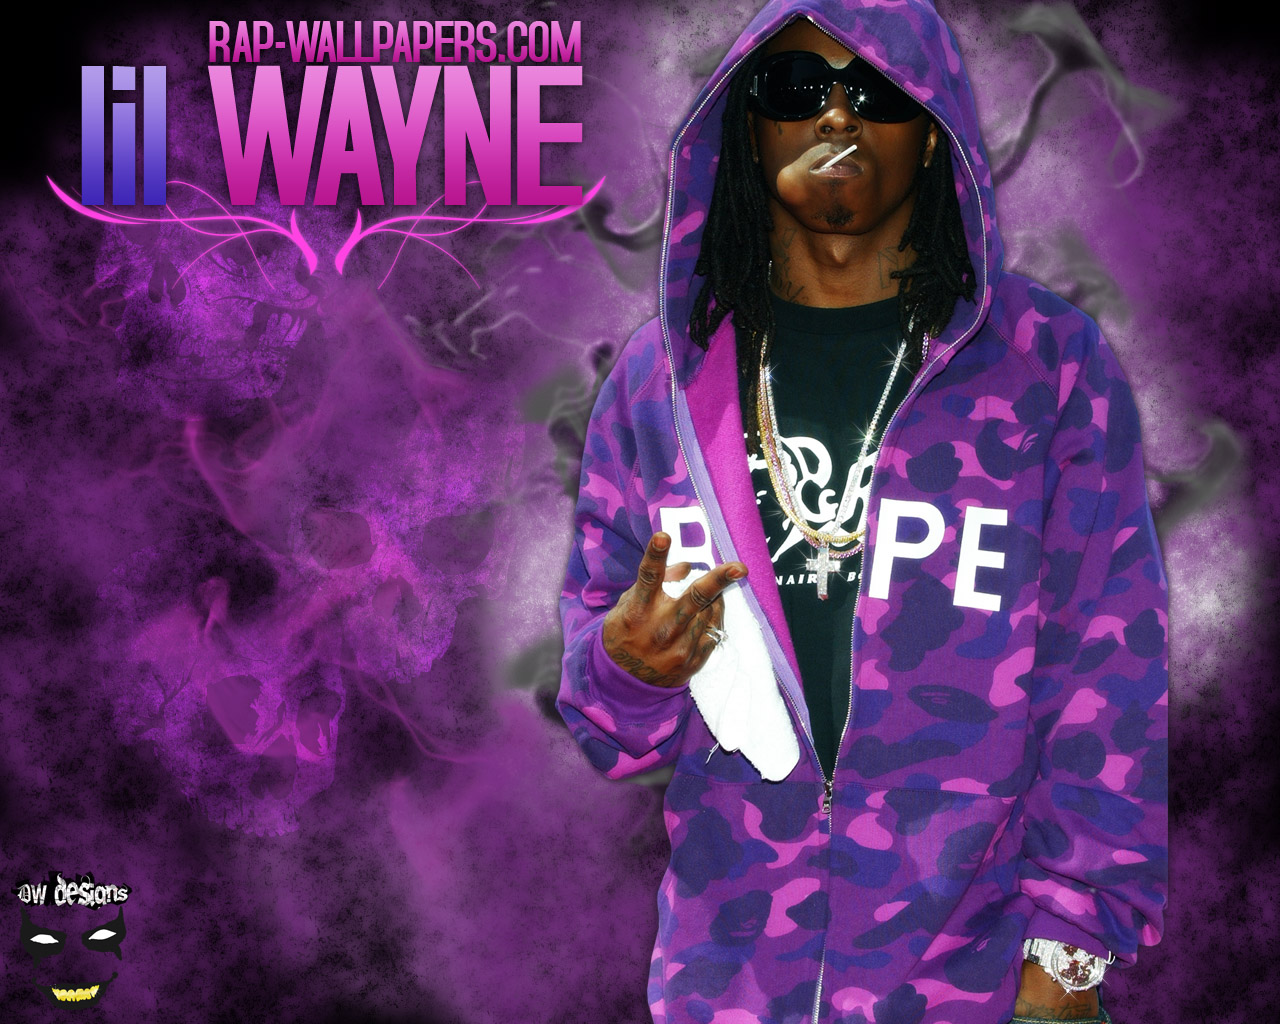 download lil wayne wallpapers and many more hip hop related wallpapers